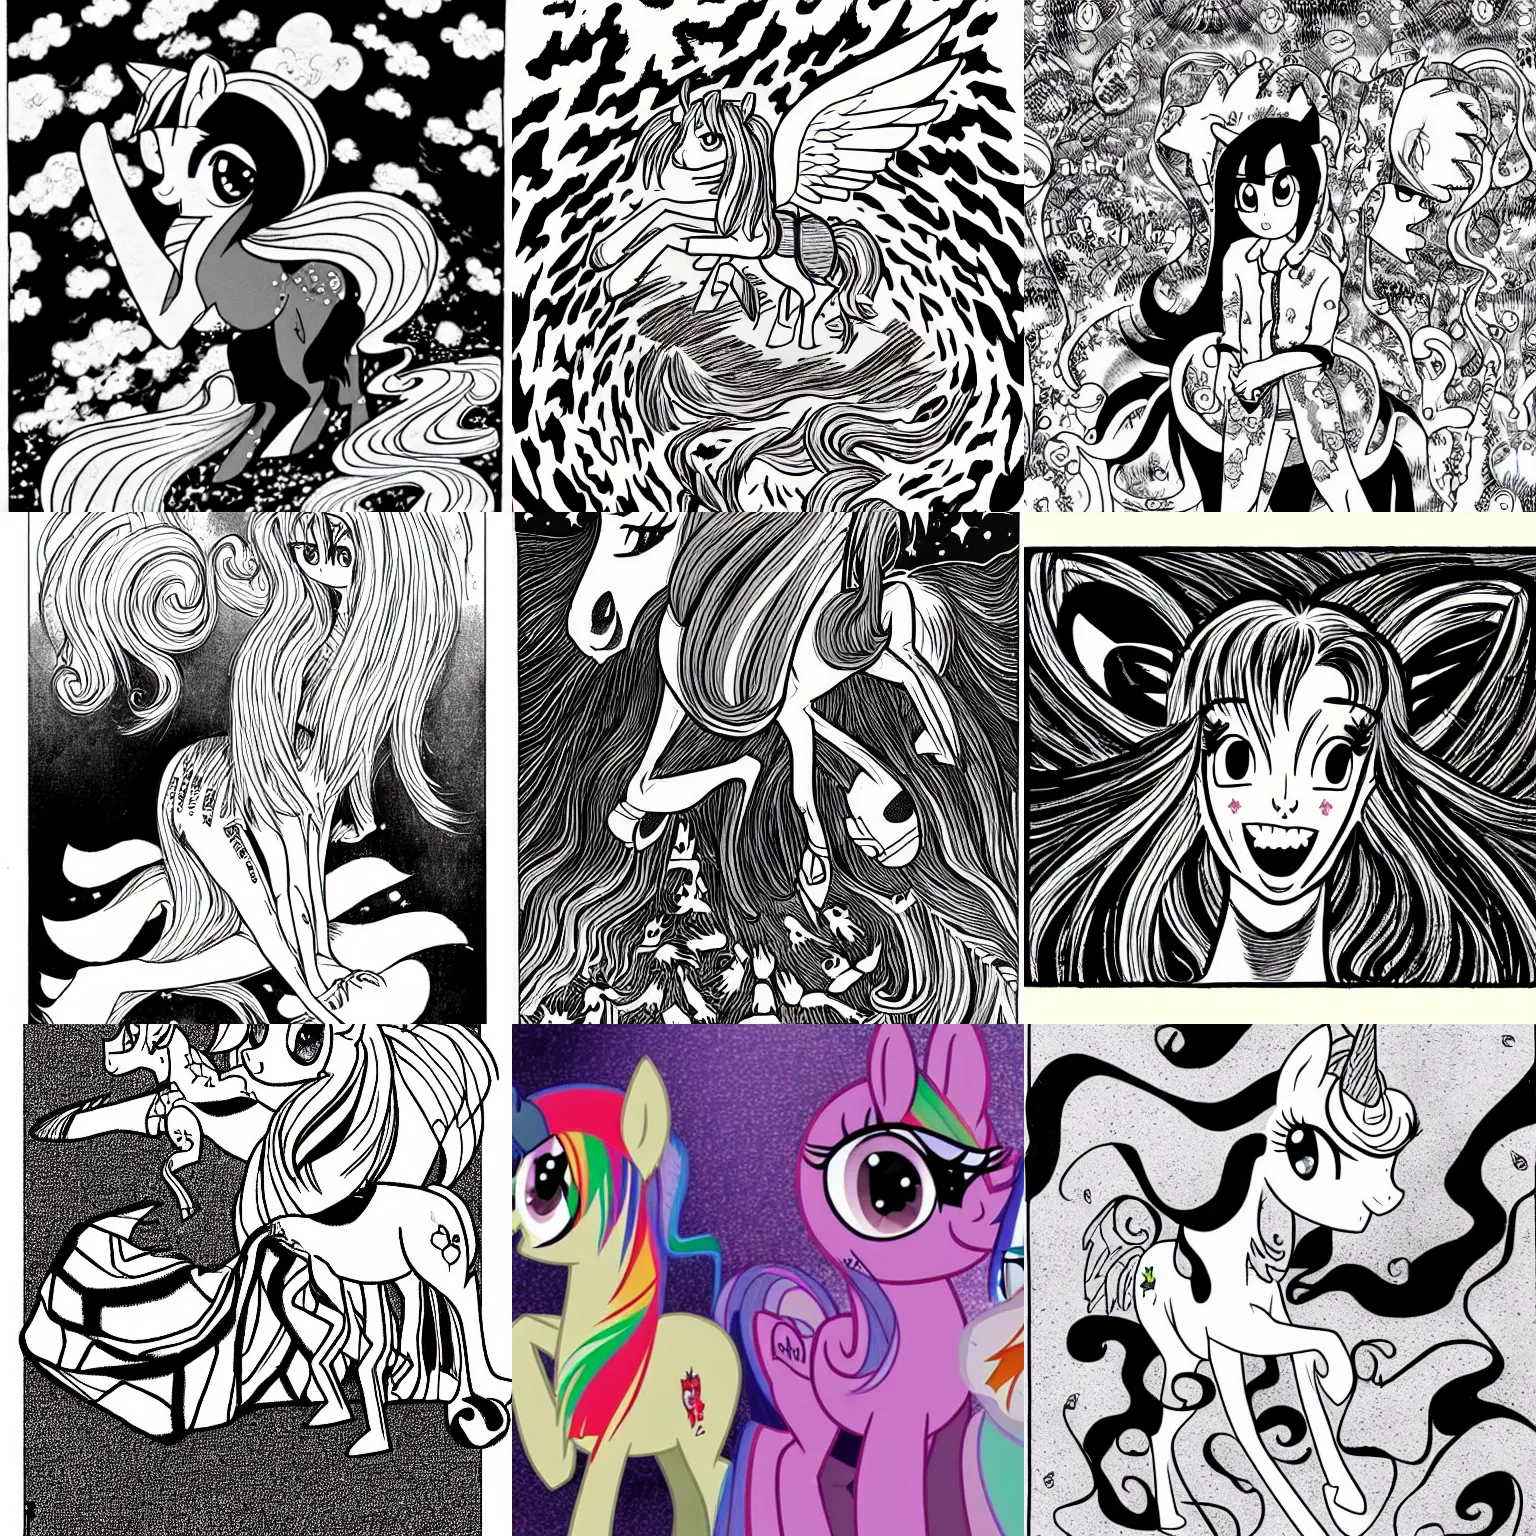 Prompt: My little pony by Junji Ito